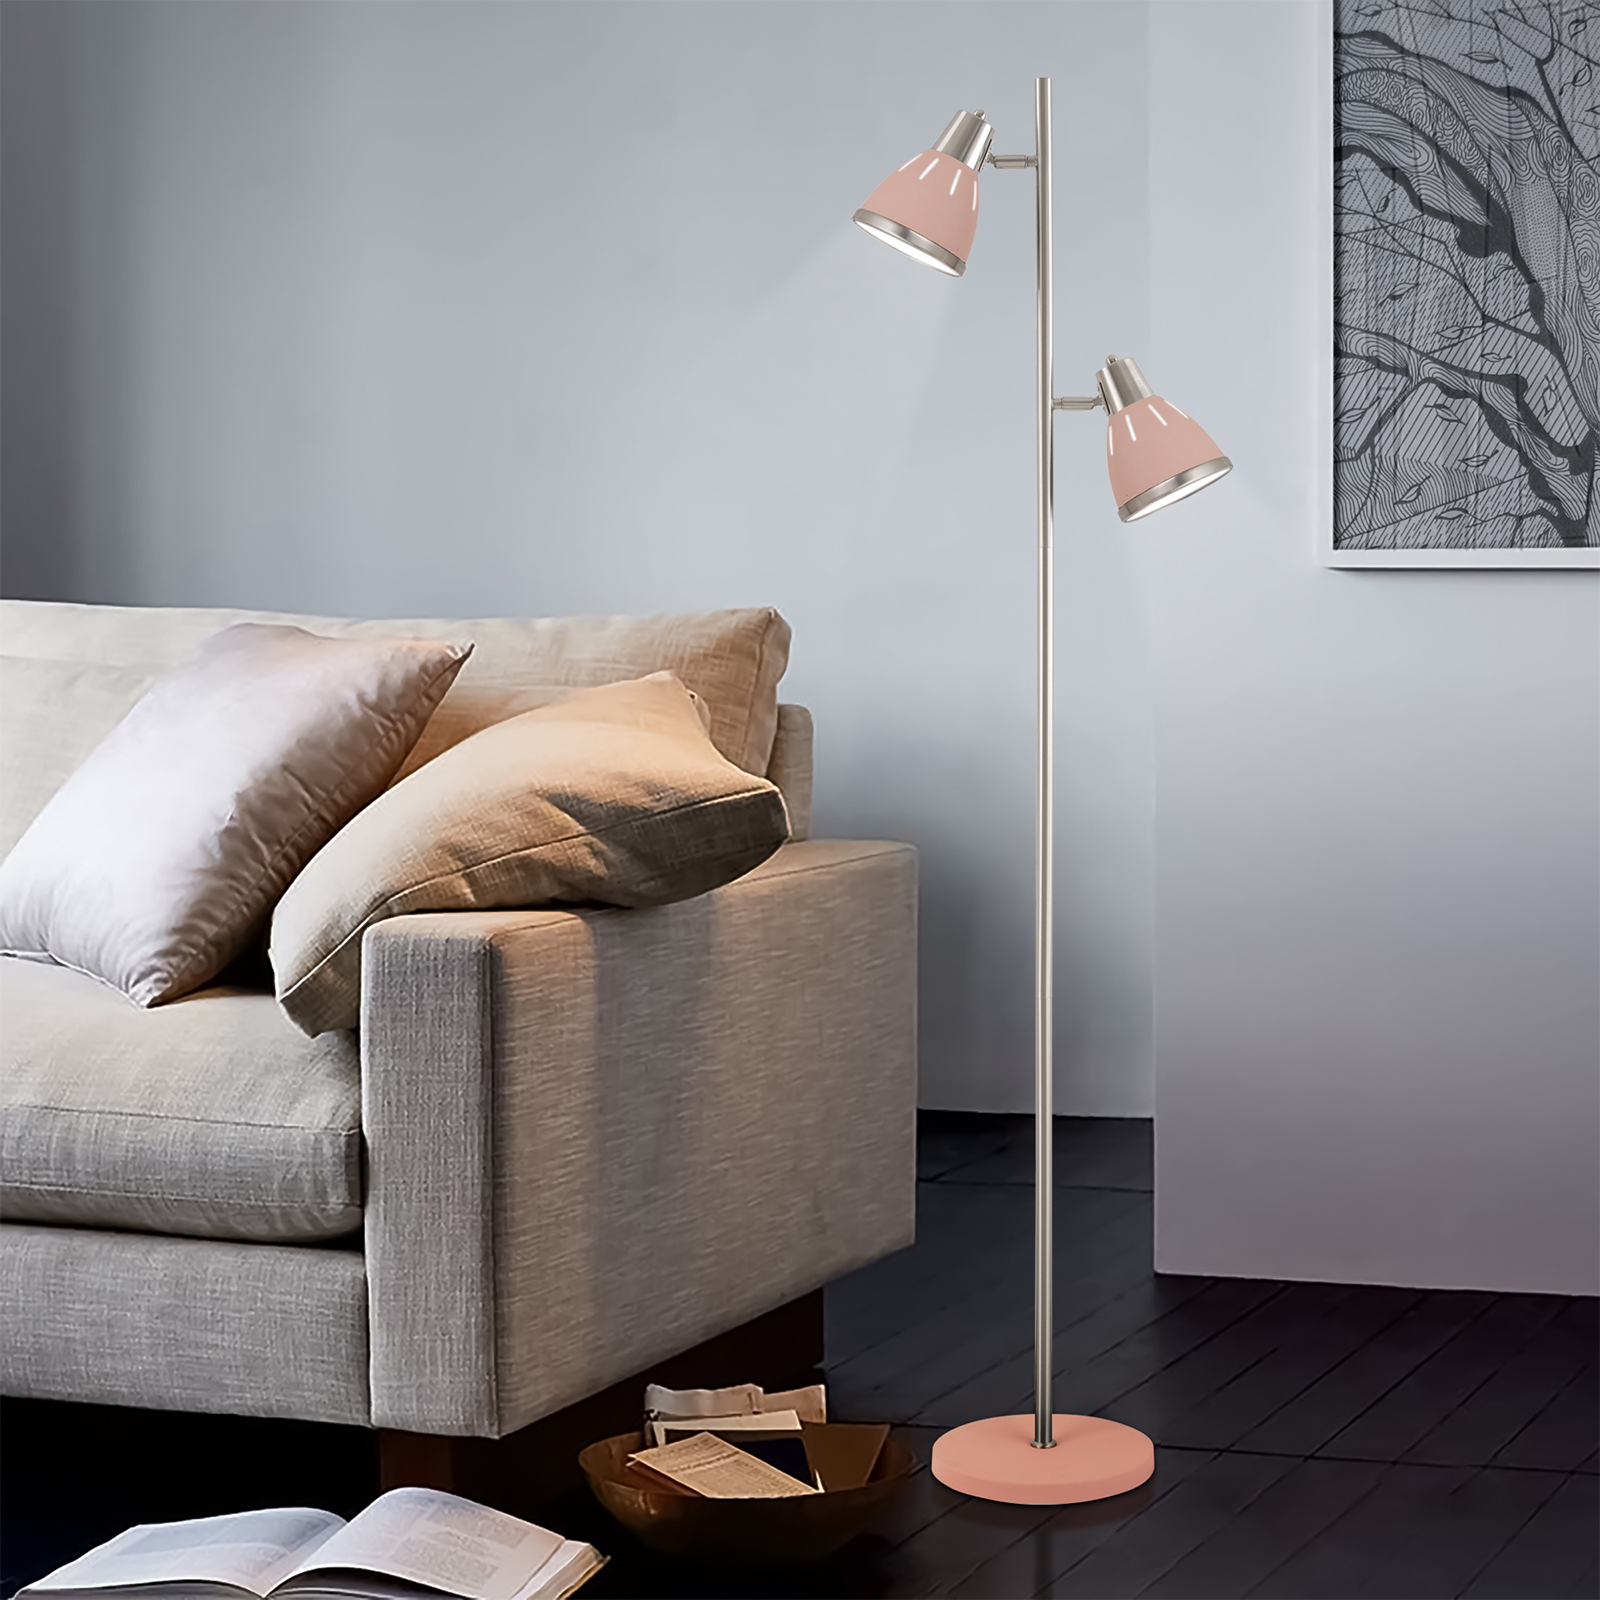 Rating of the best floor lamps for 2022